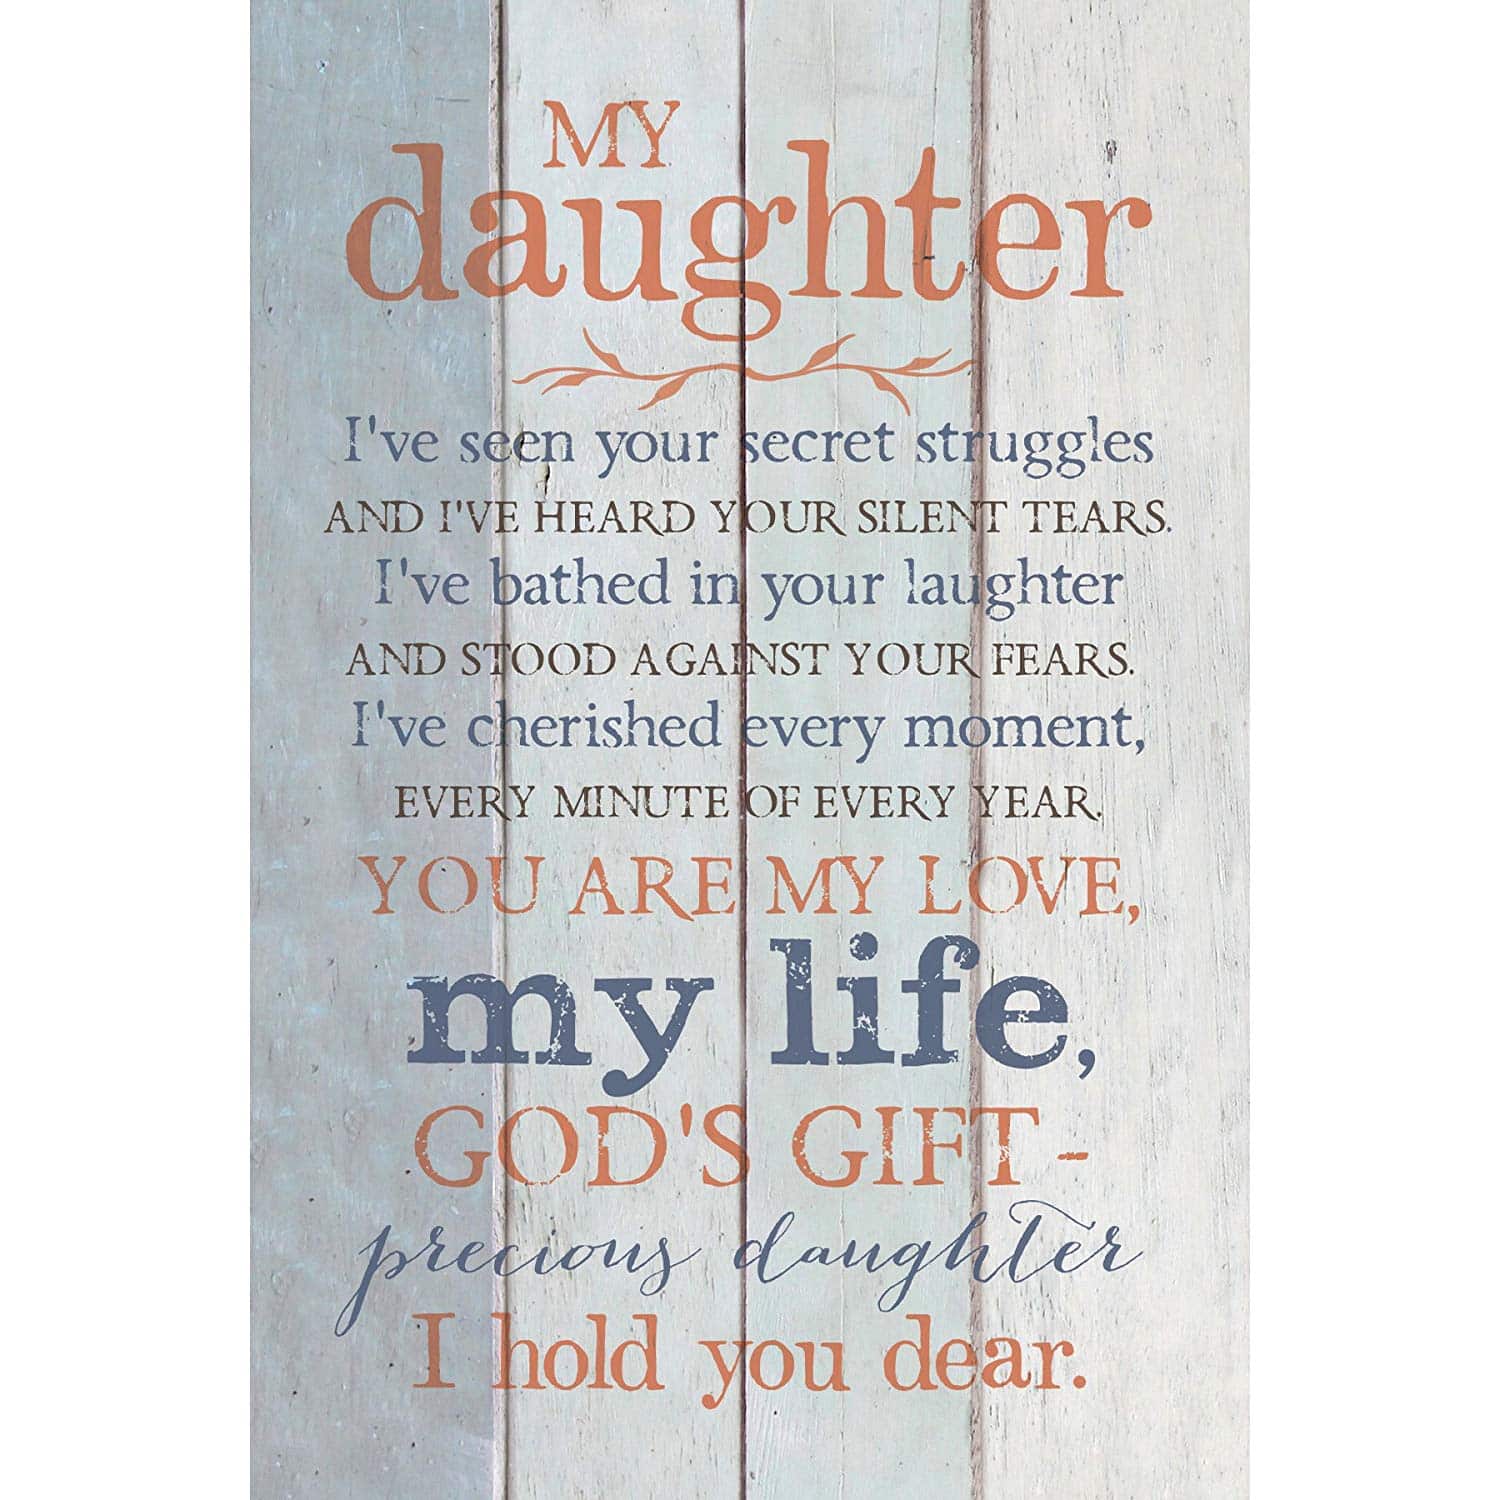 19 Gifts For Your Daughter In 2020 Step Daughters In Law